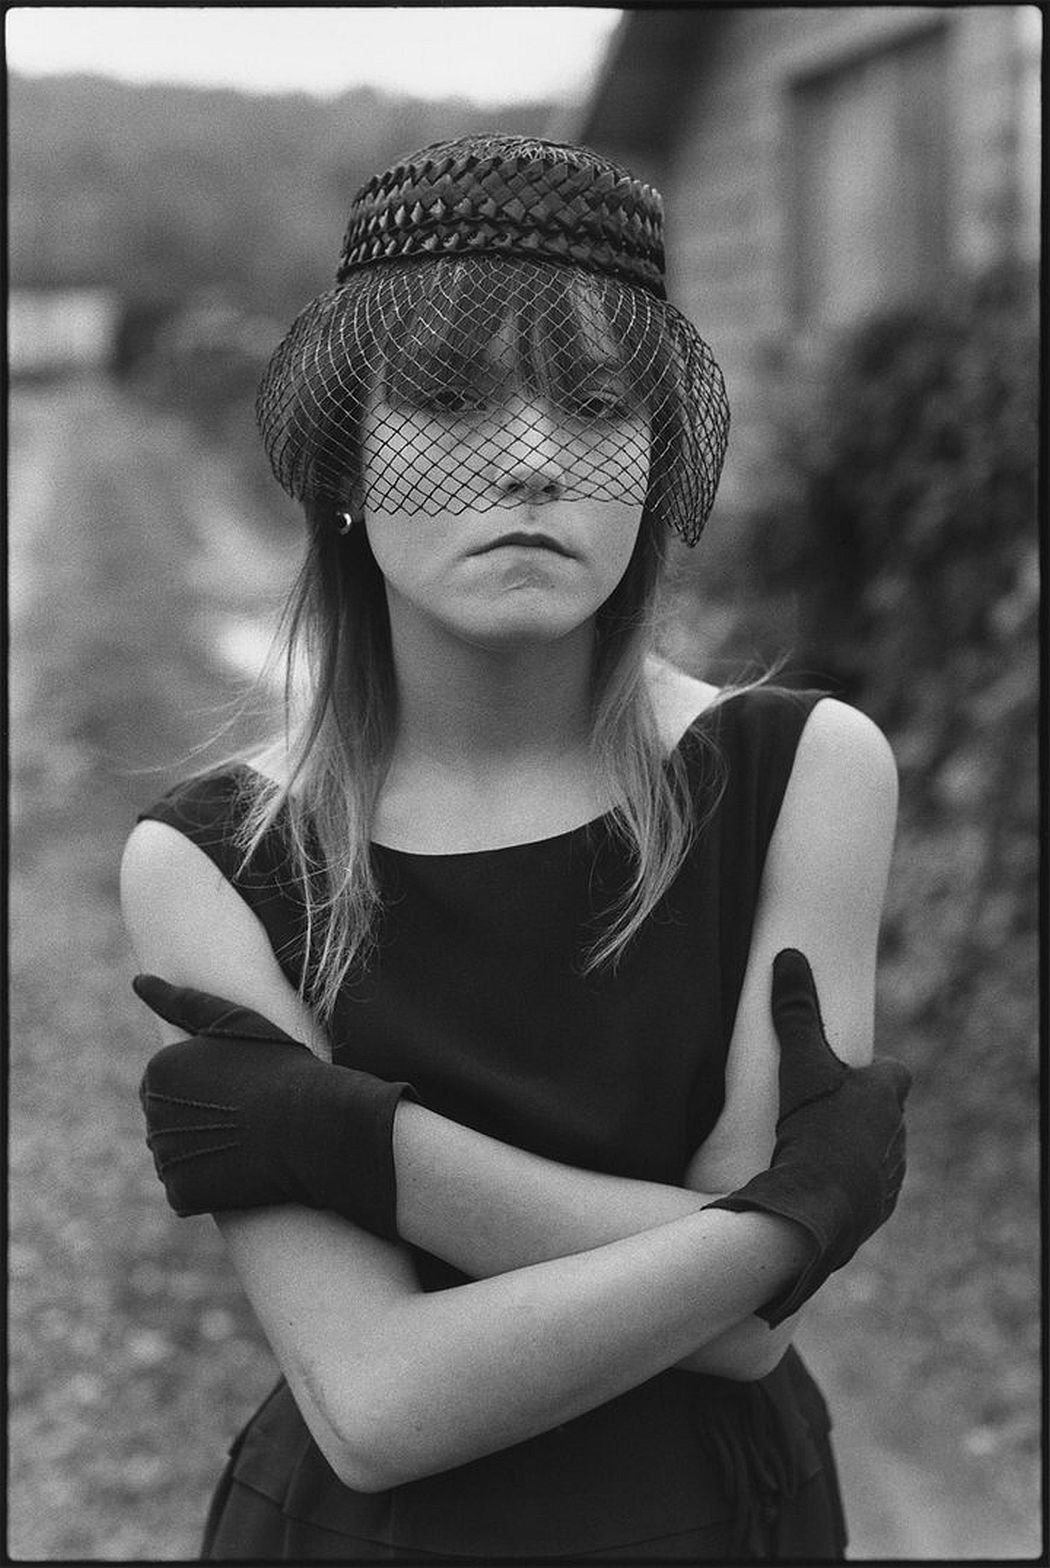 mary-ellen-mark-tiny-streetwise-revisited-02